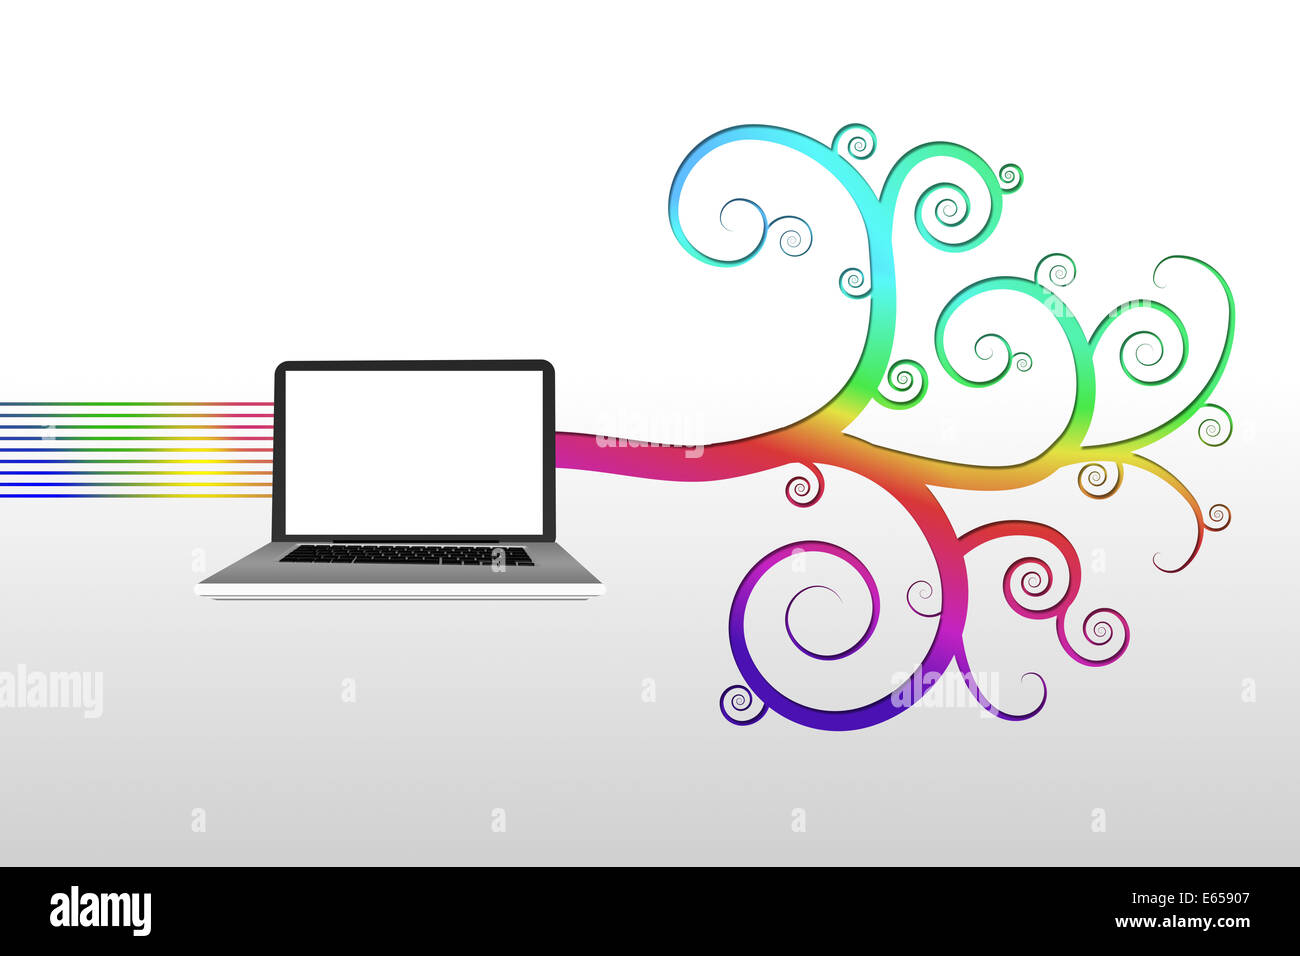 Laptop with colourful spiral design Stock Photo